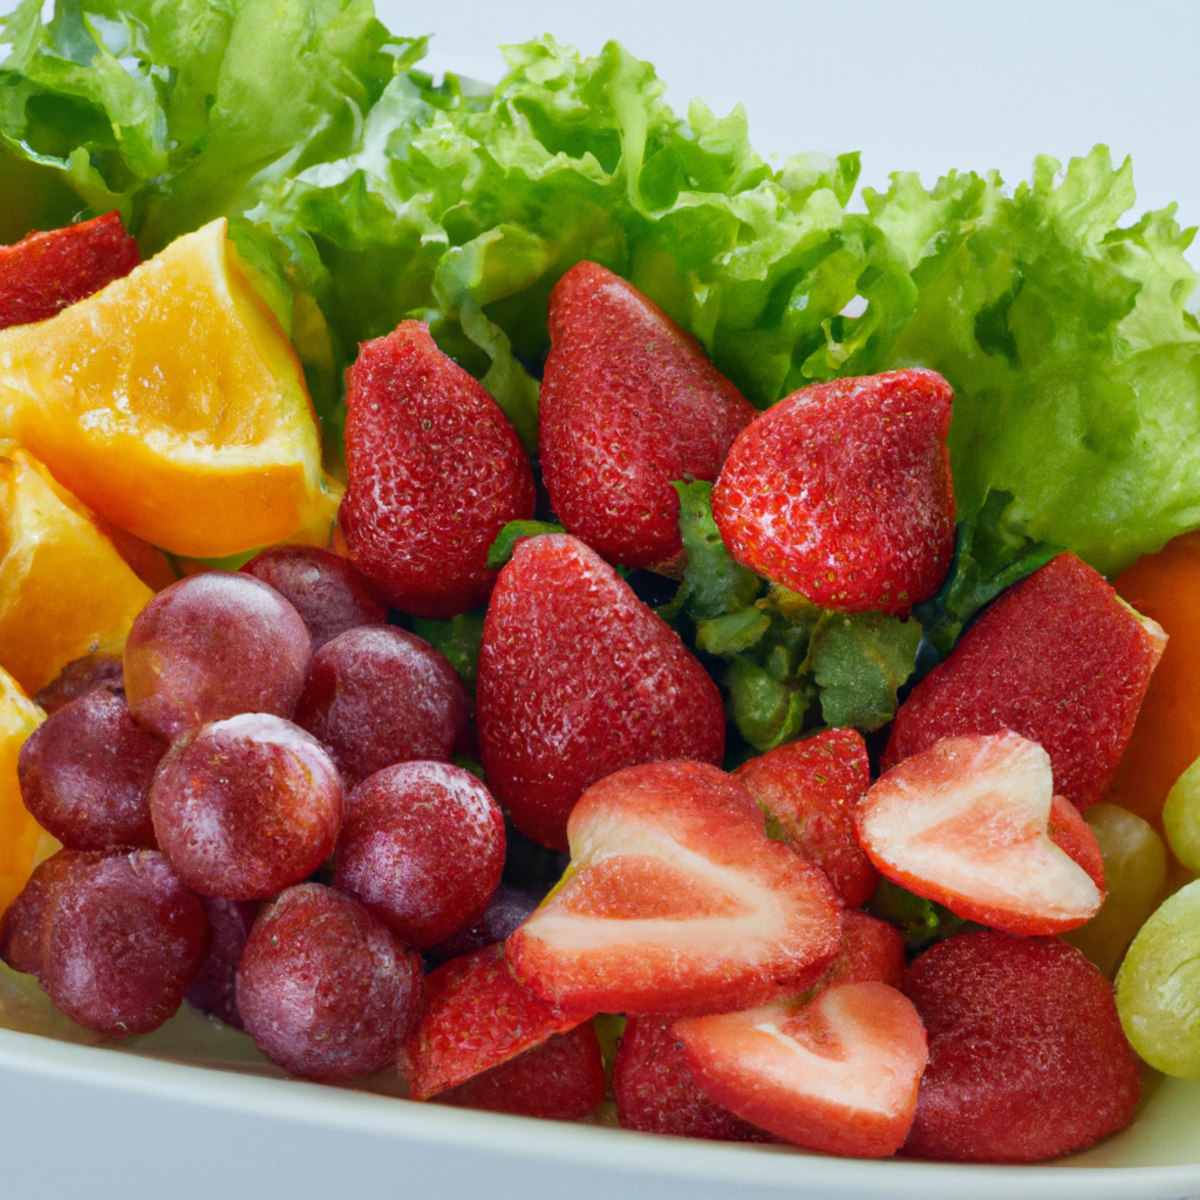 Fresh and vibrant fruits and vegetables on a white plate, symbolizing the importance of nutrition in managing Eosinophilic Gastroenteritis.